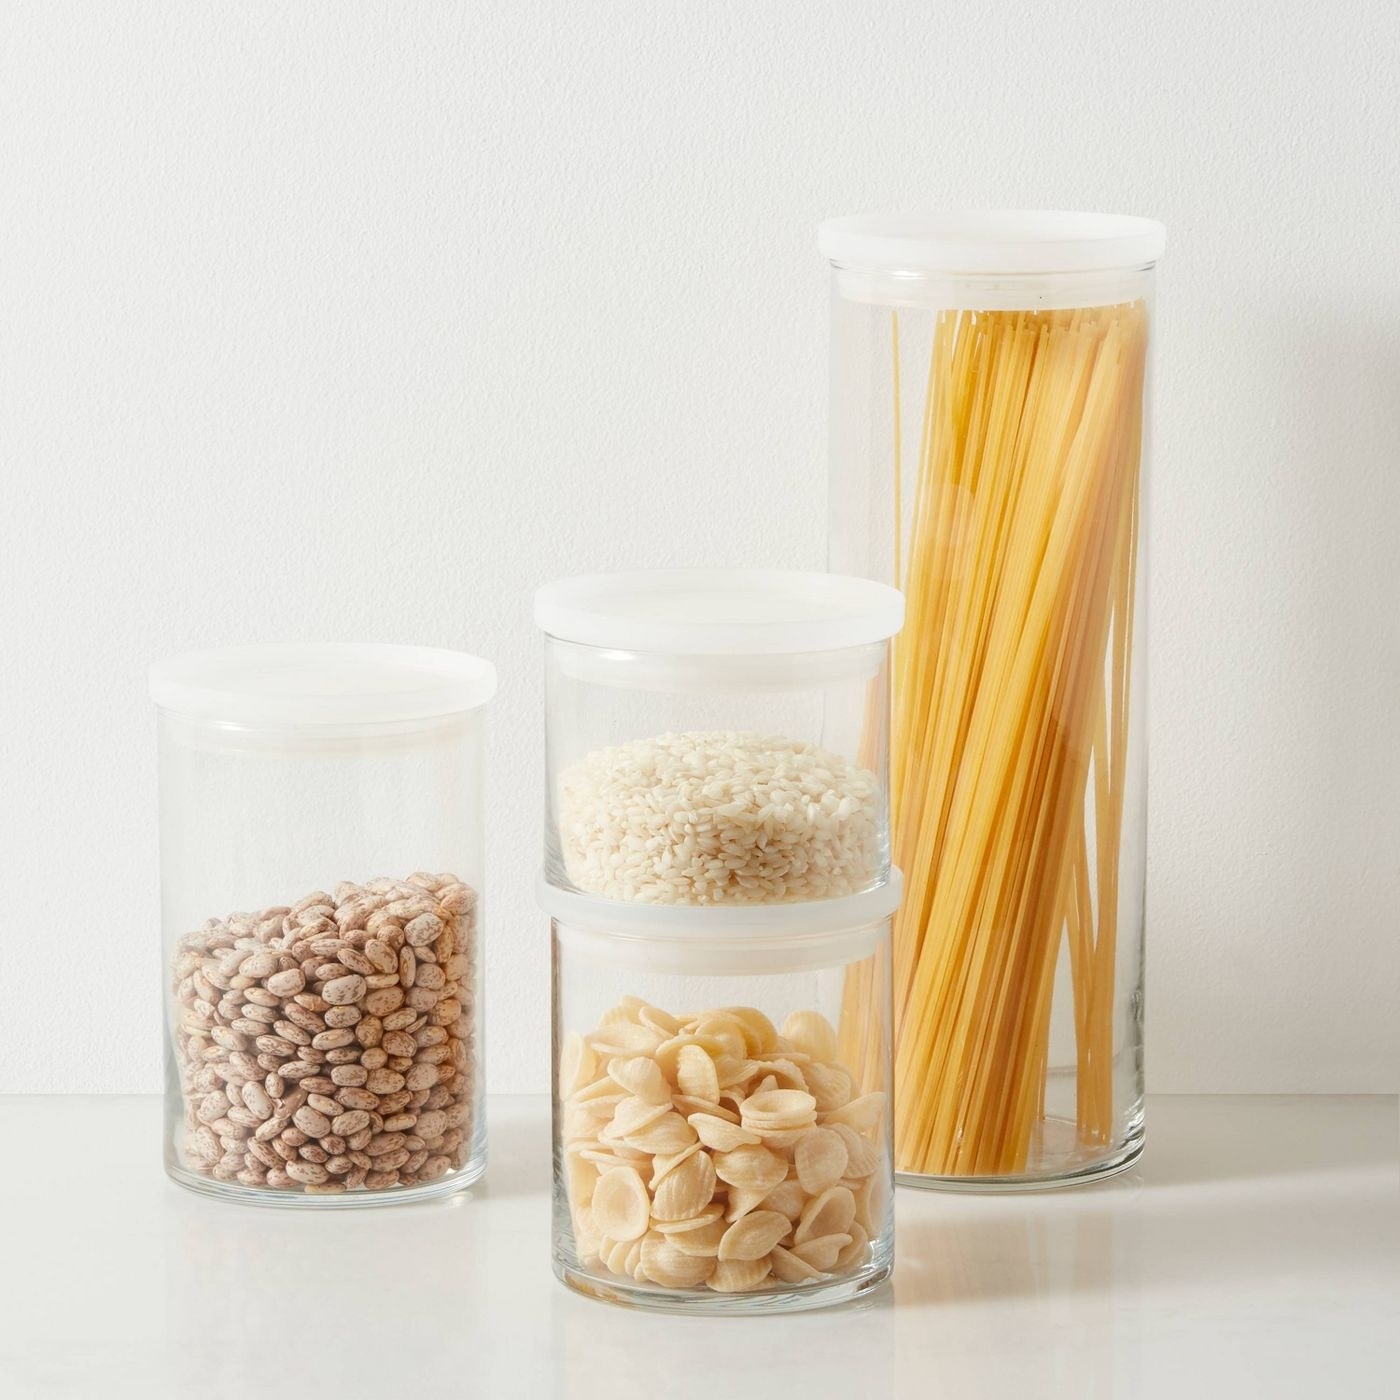 the small jar full of rice with other sizes of jars of dry goods